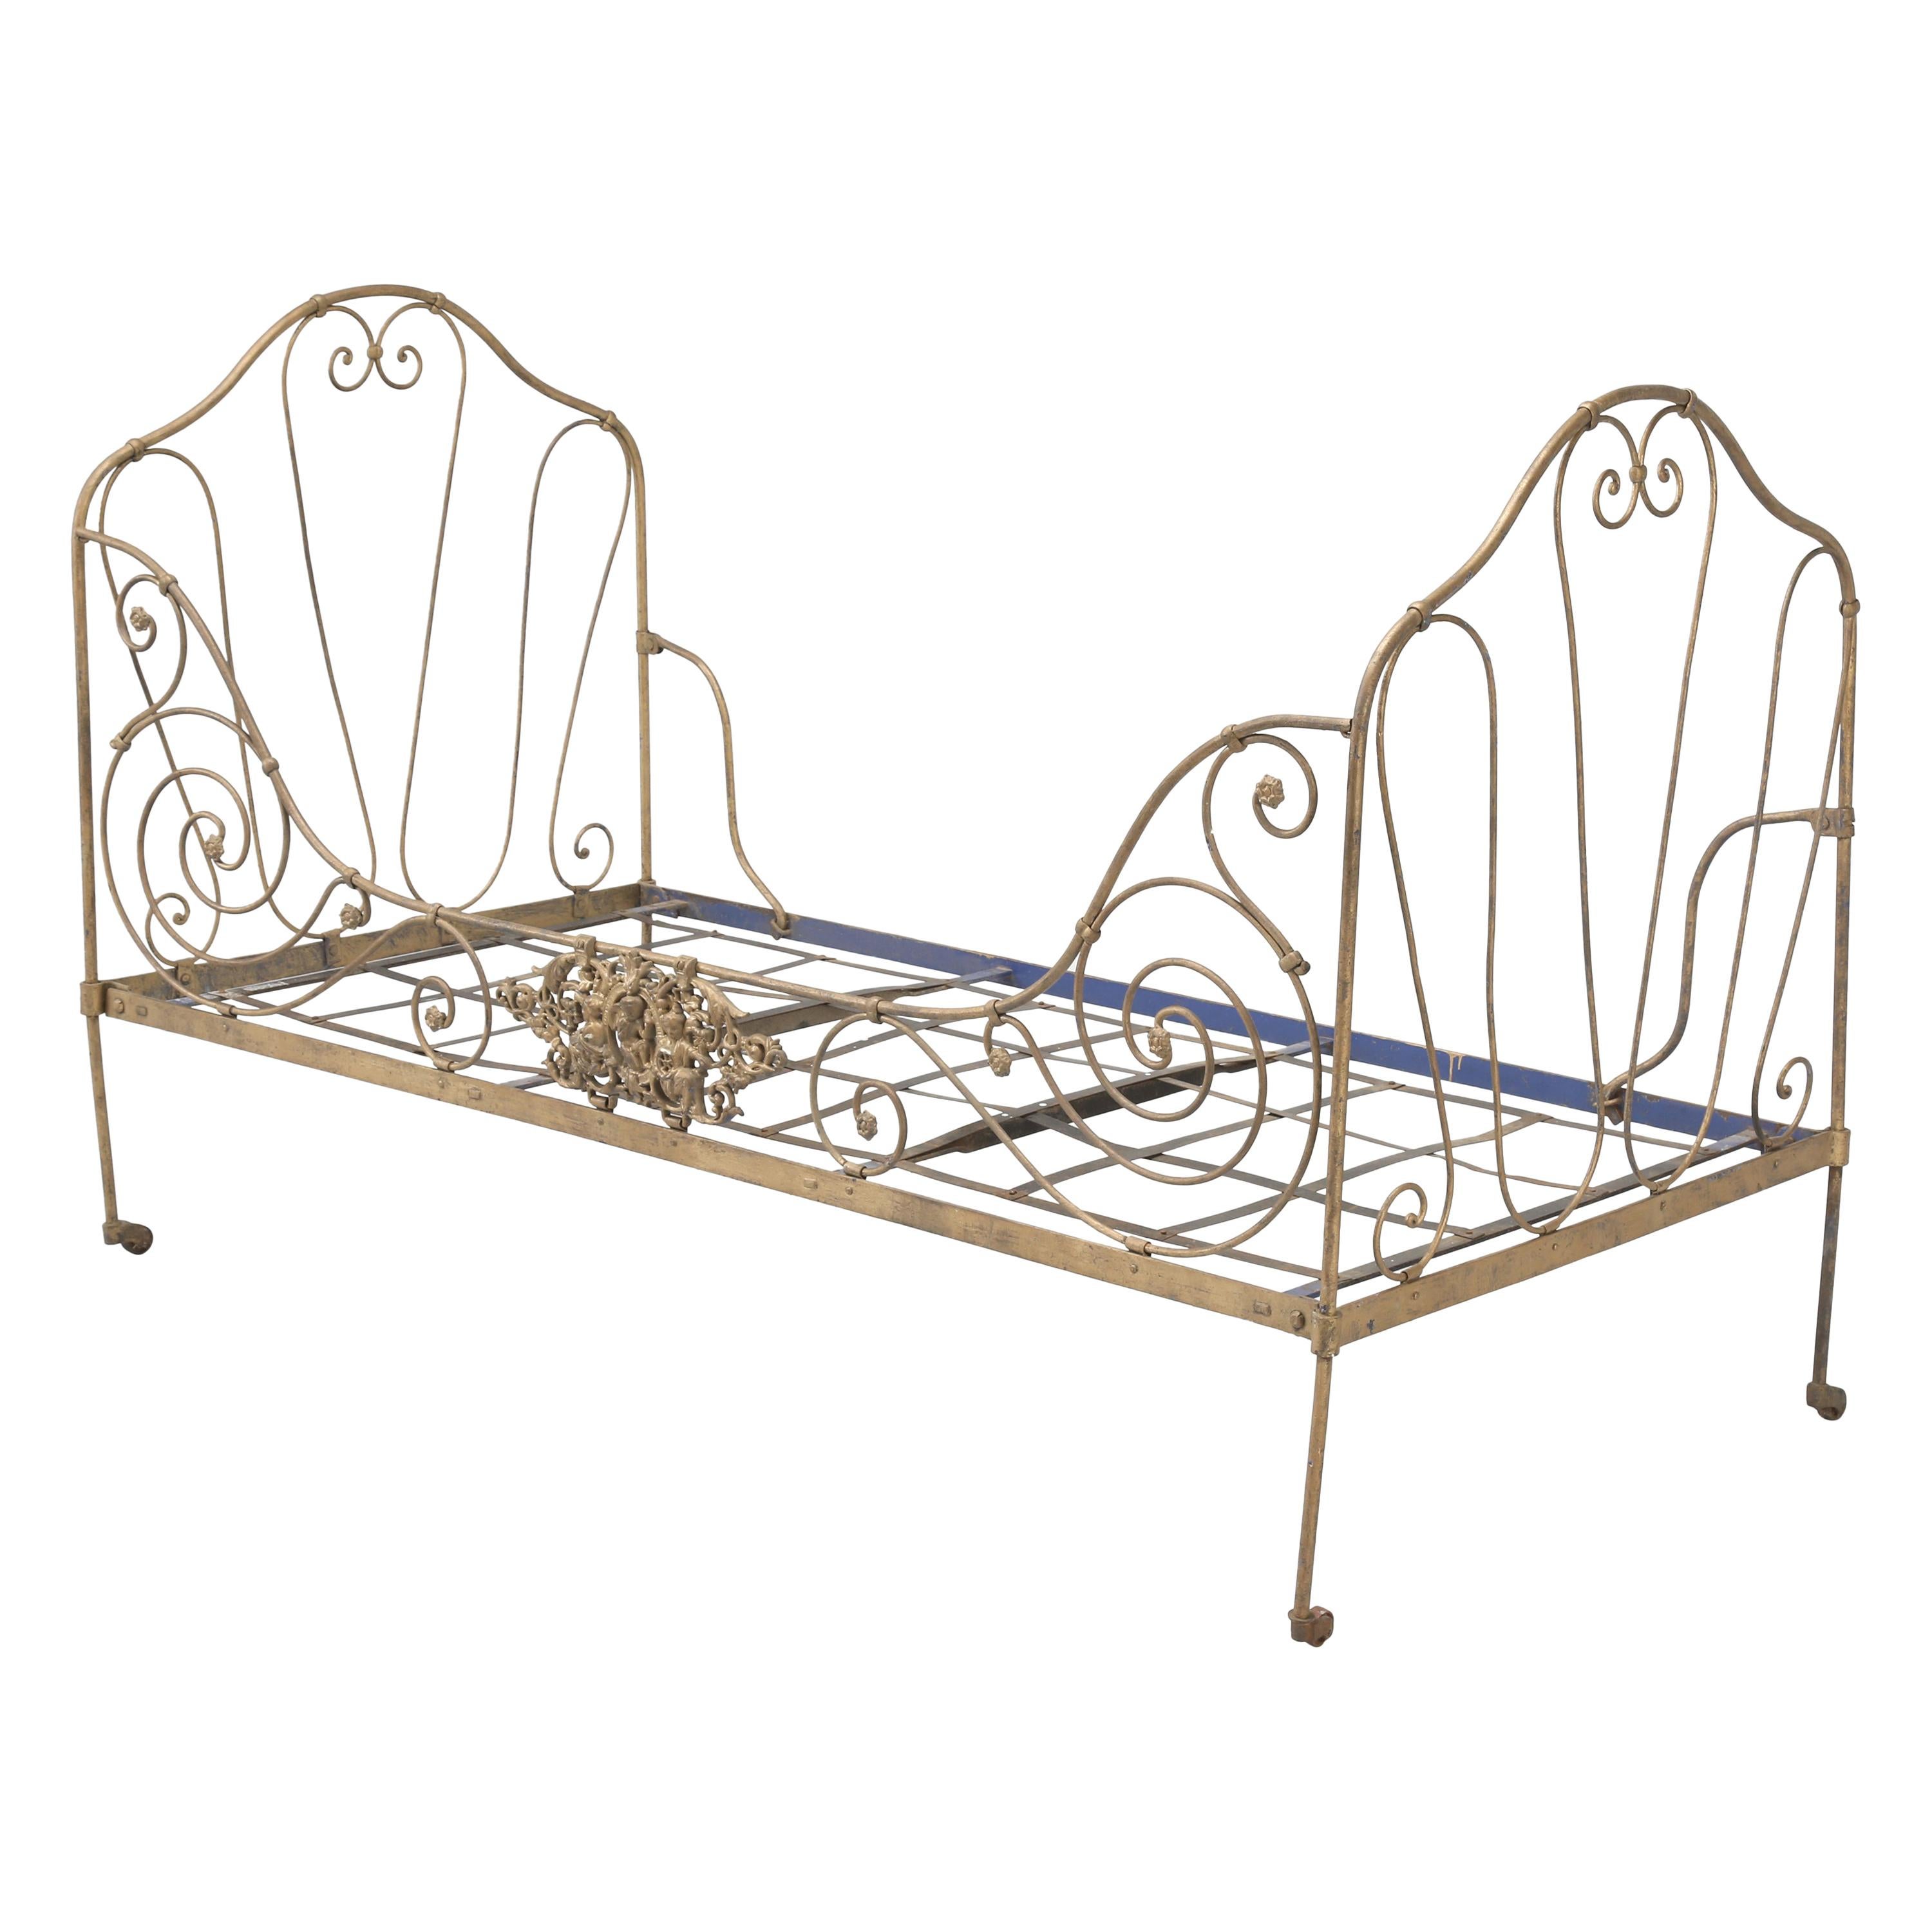 Antique French Metal Daybed in Old Paint